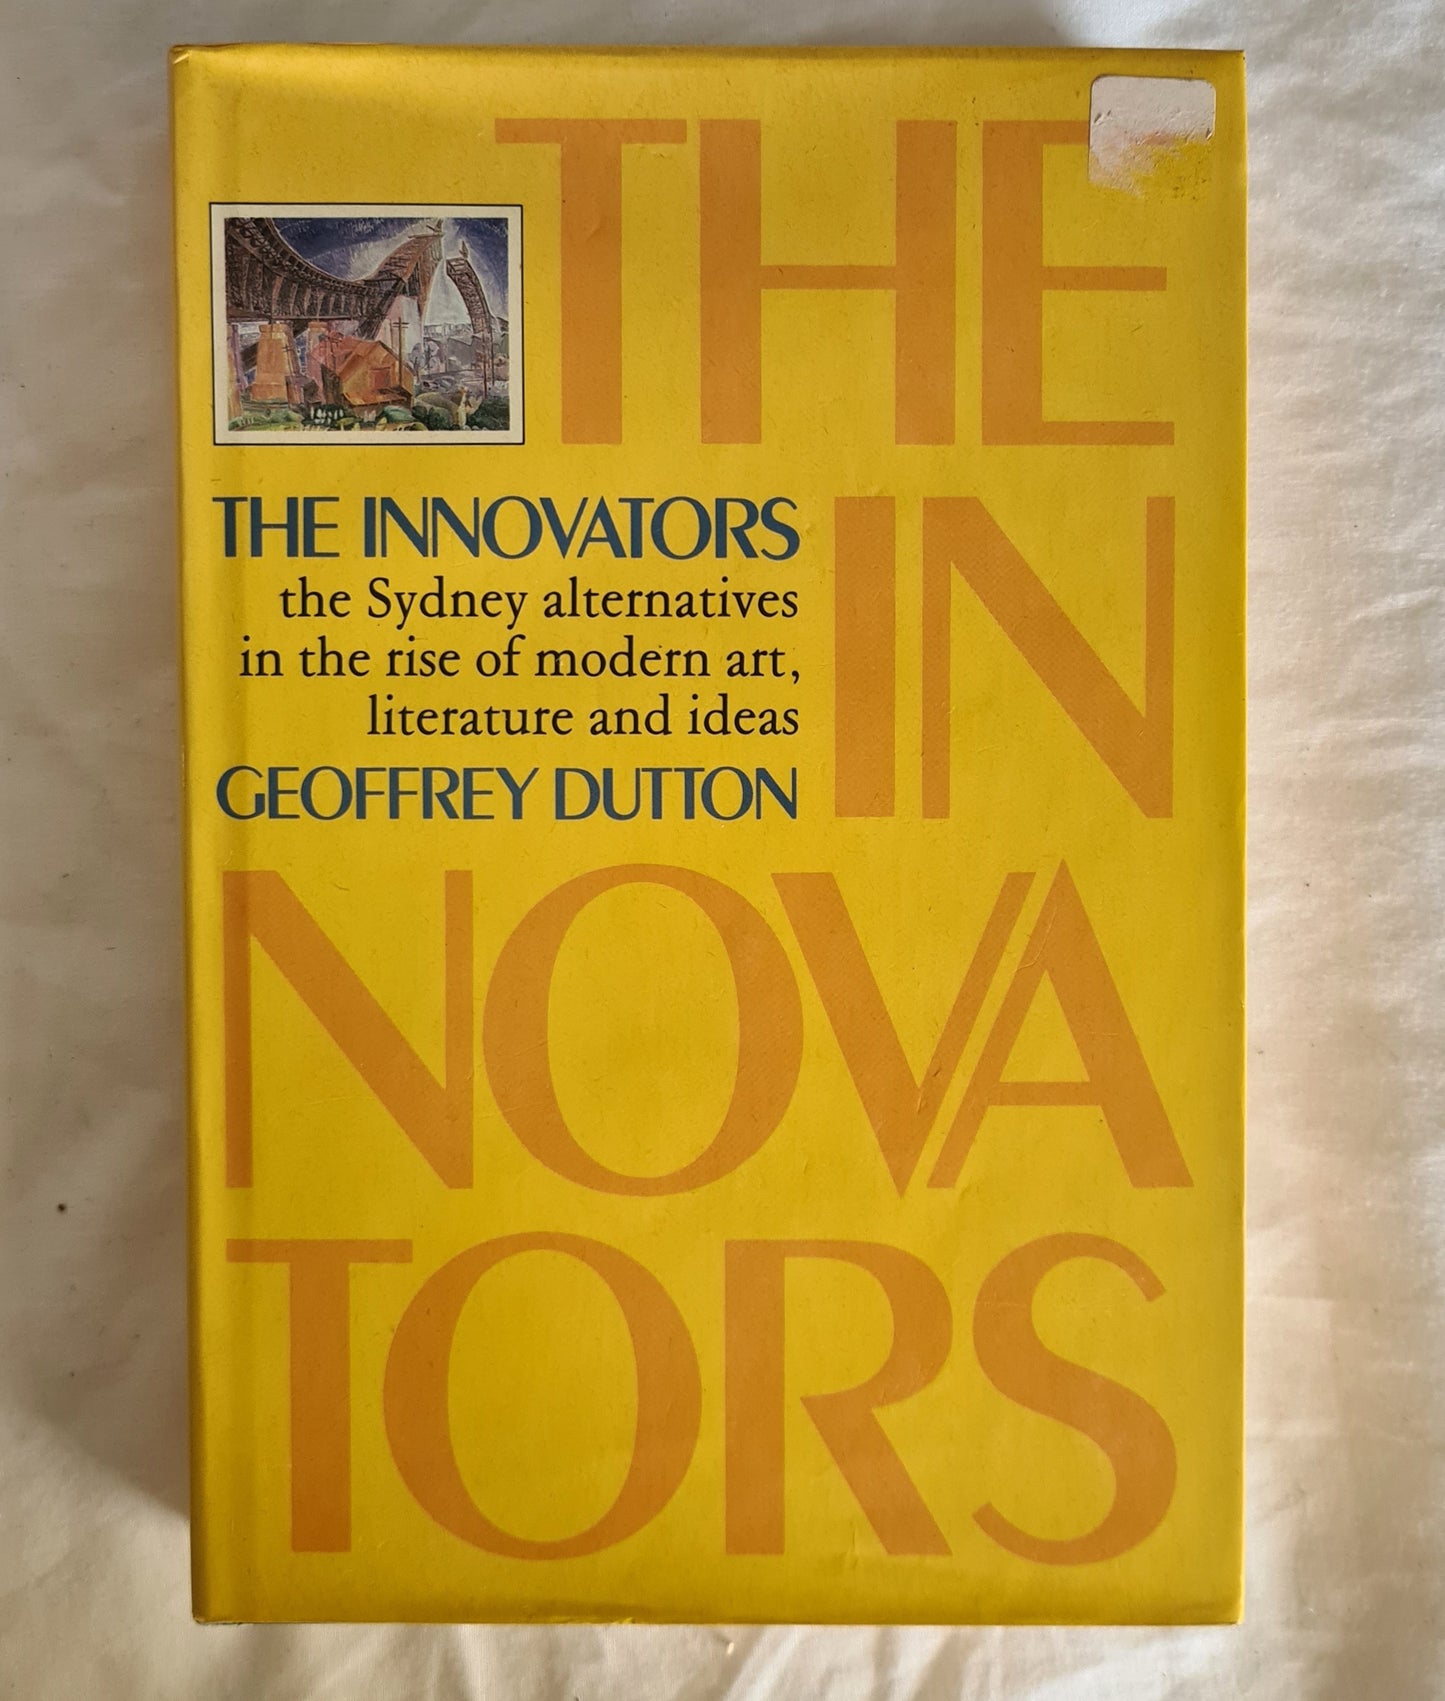 The Innovators  The Sydney alternatives in the rise of modern art, literature and ideas  by Geoffrey Dutton